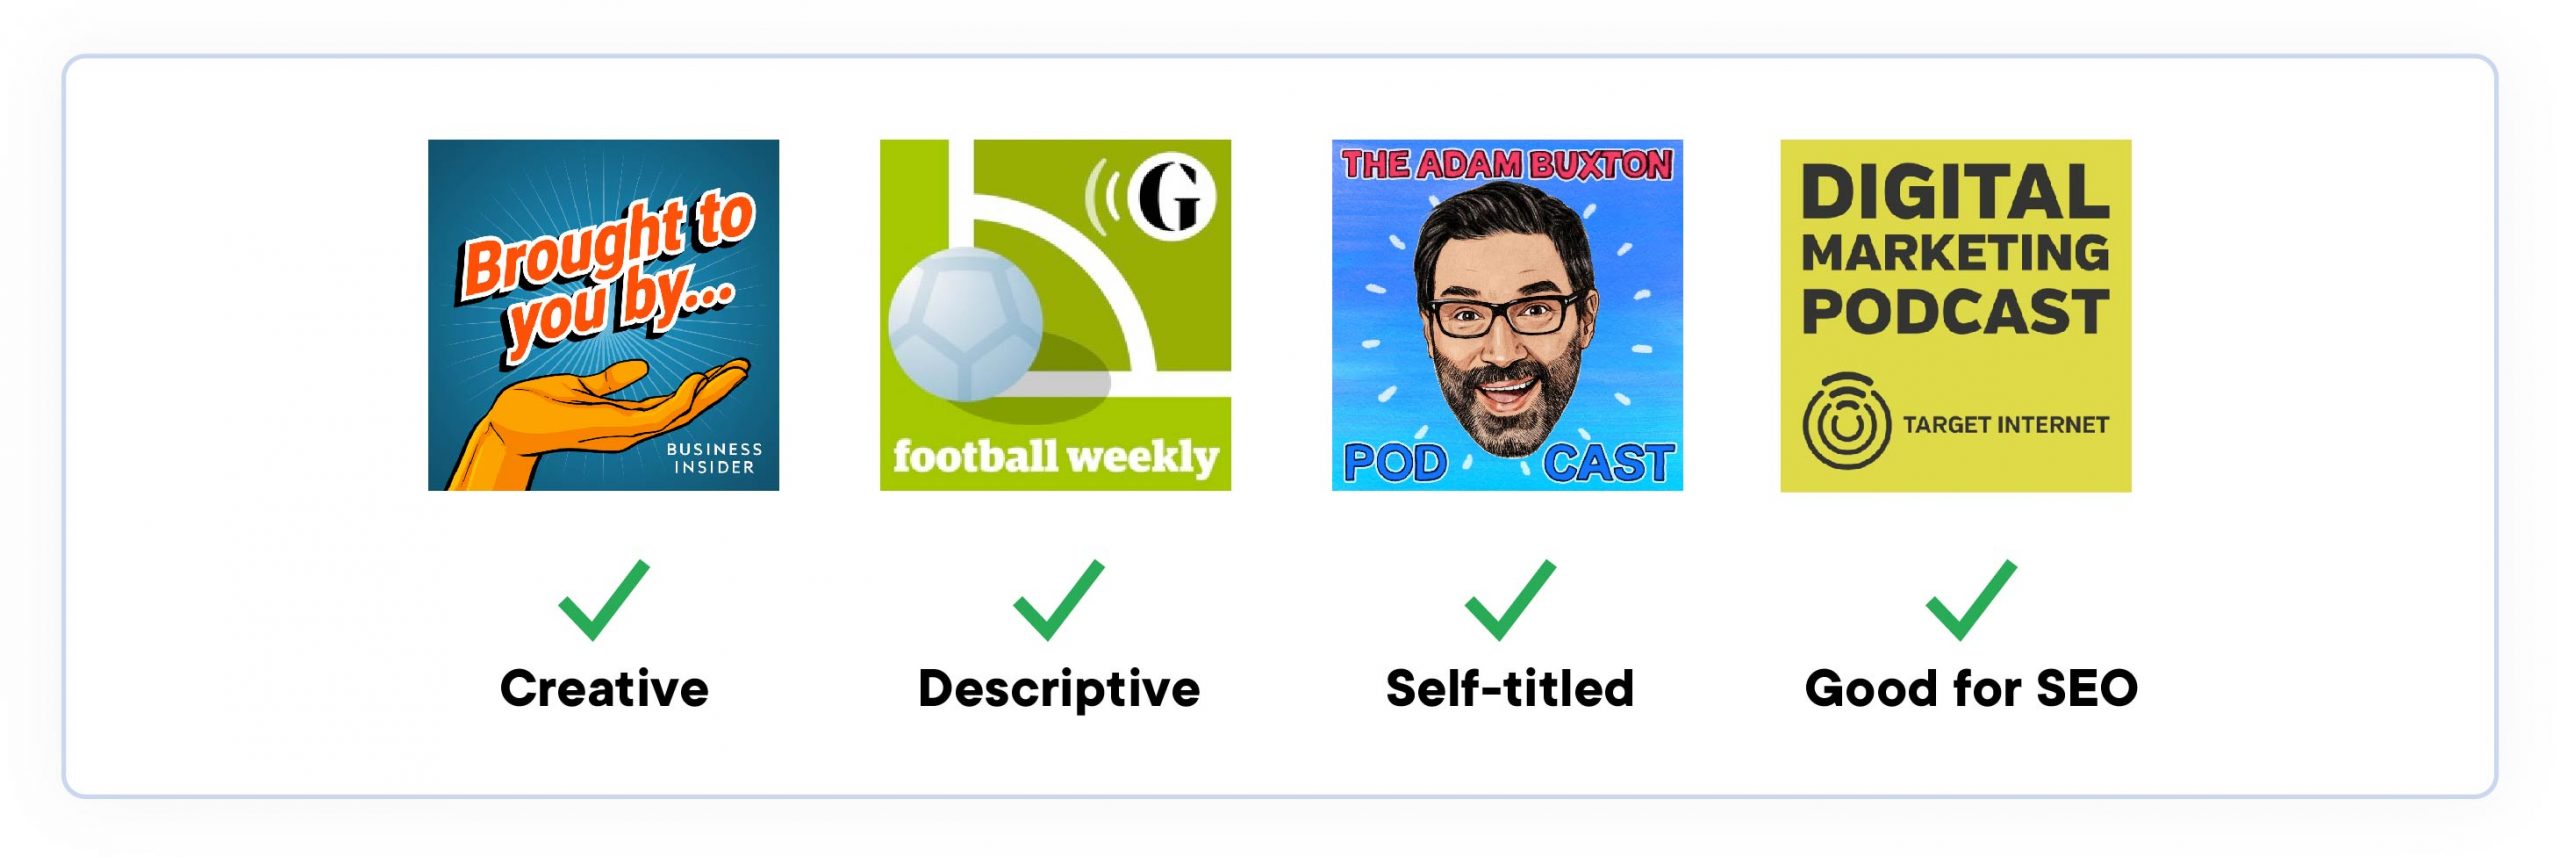 podcast names. 4 podcast covers and names, showing examples of creative, relevant, self-titled and optimized podcast names.